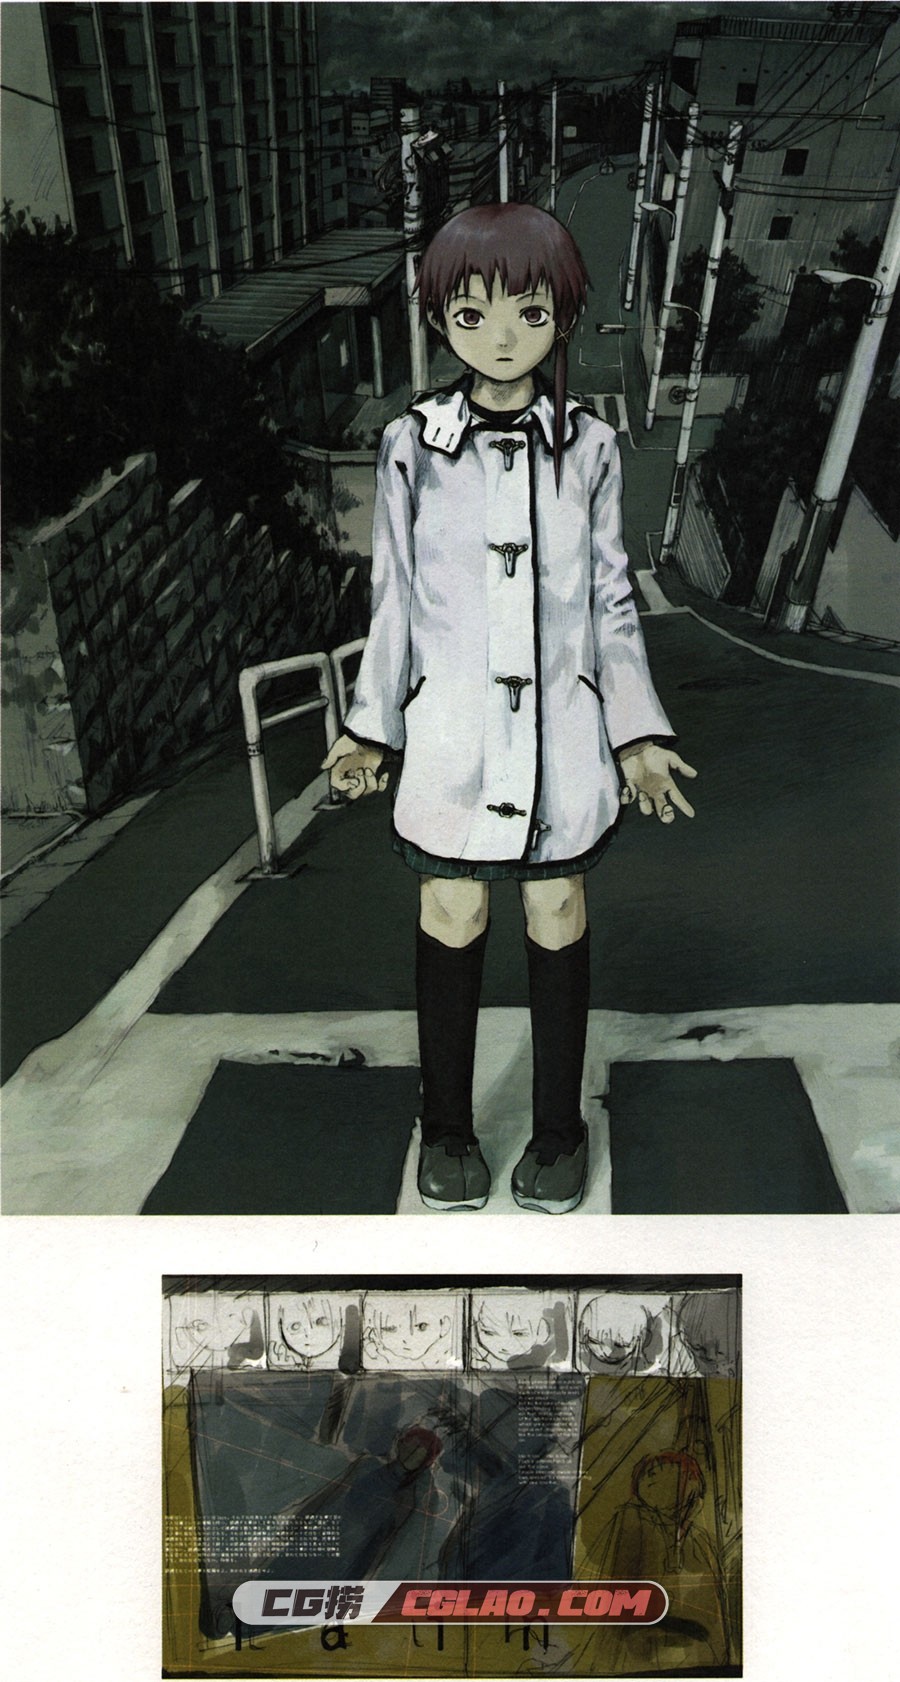 an omnipresence in wired lain 安倍吉俊 オムニプレゼンス 百度云,04_scan1.jpg